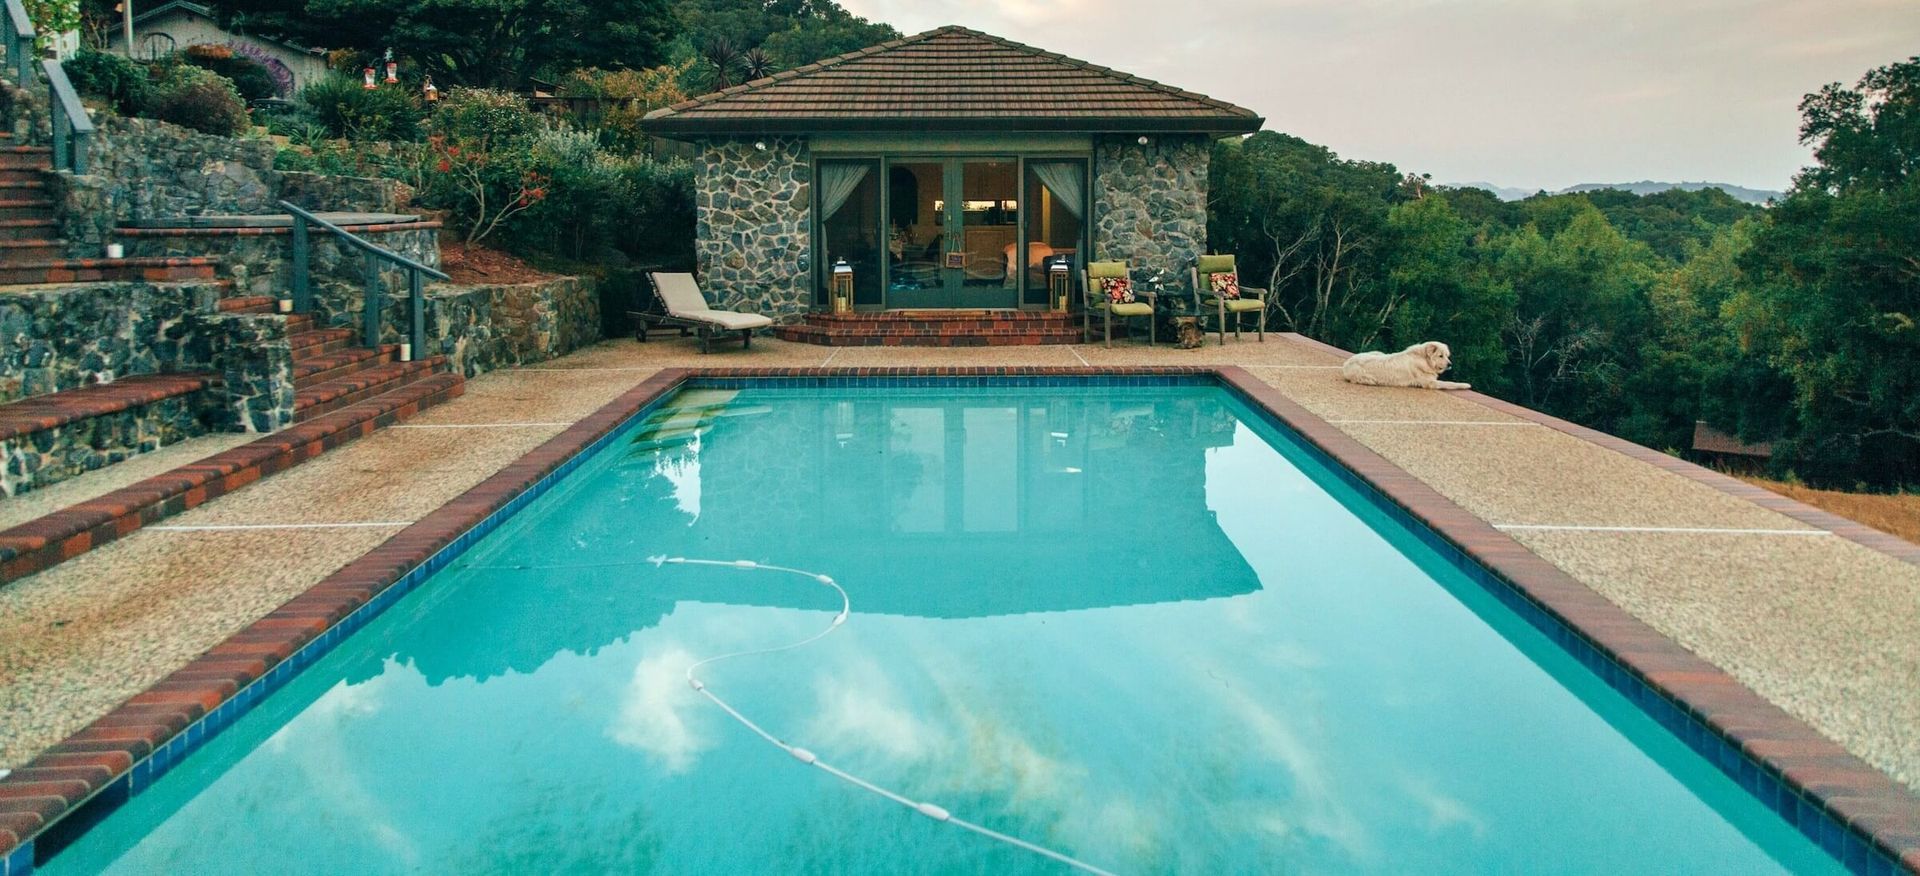 Concrete pool deck coatings can be very beneficial to you and your property